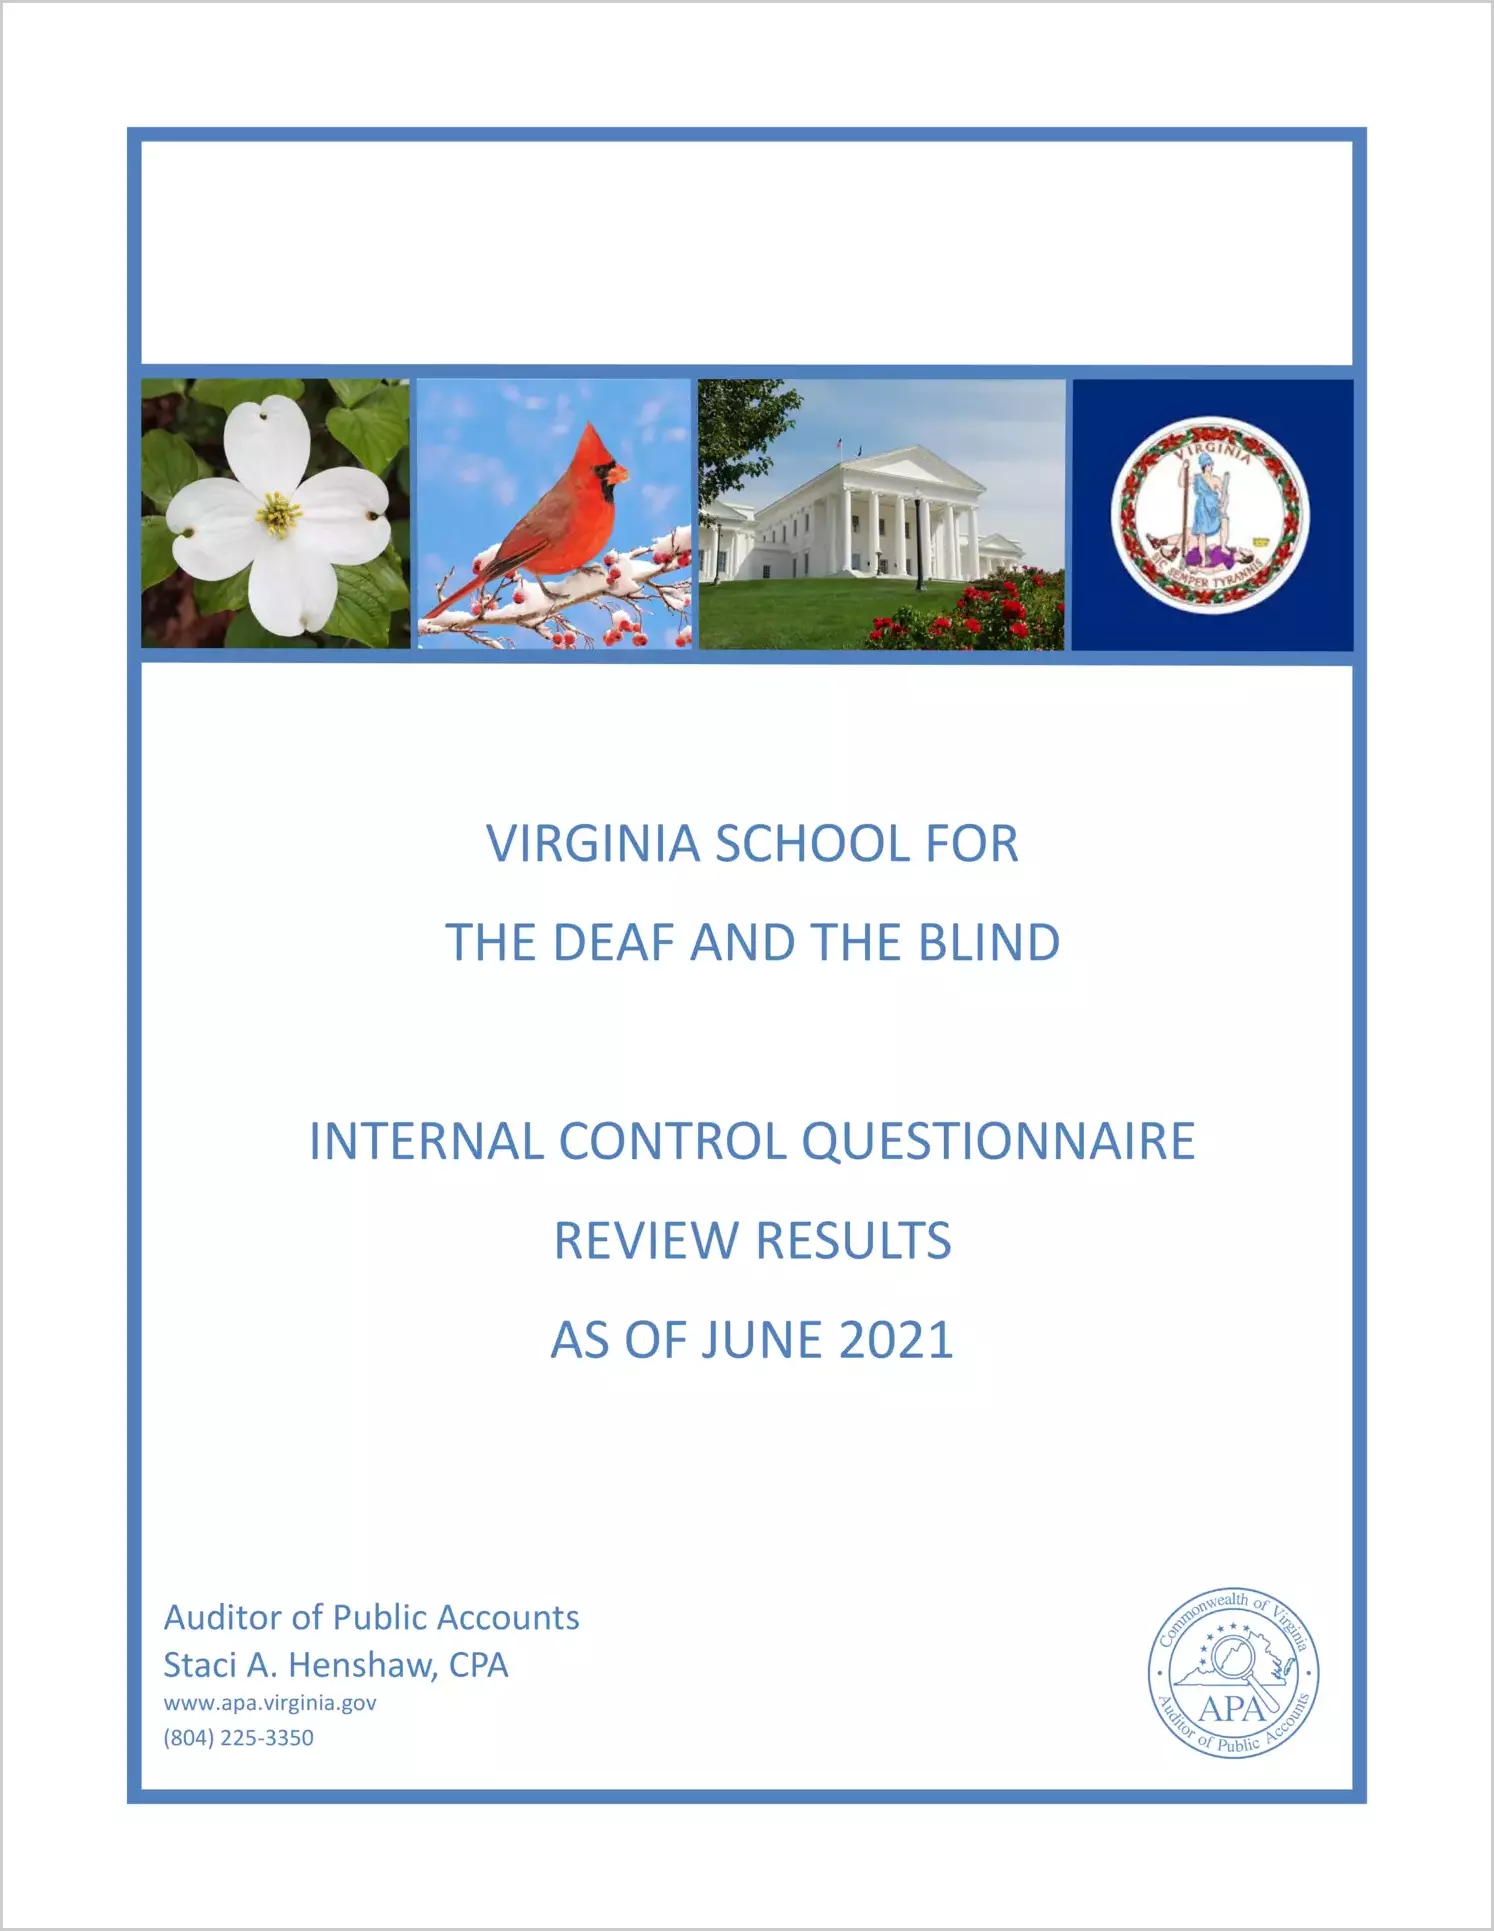 Virginia School for the Deaf and the Blind Internal Control Questionnaire Review Results as of June 2021